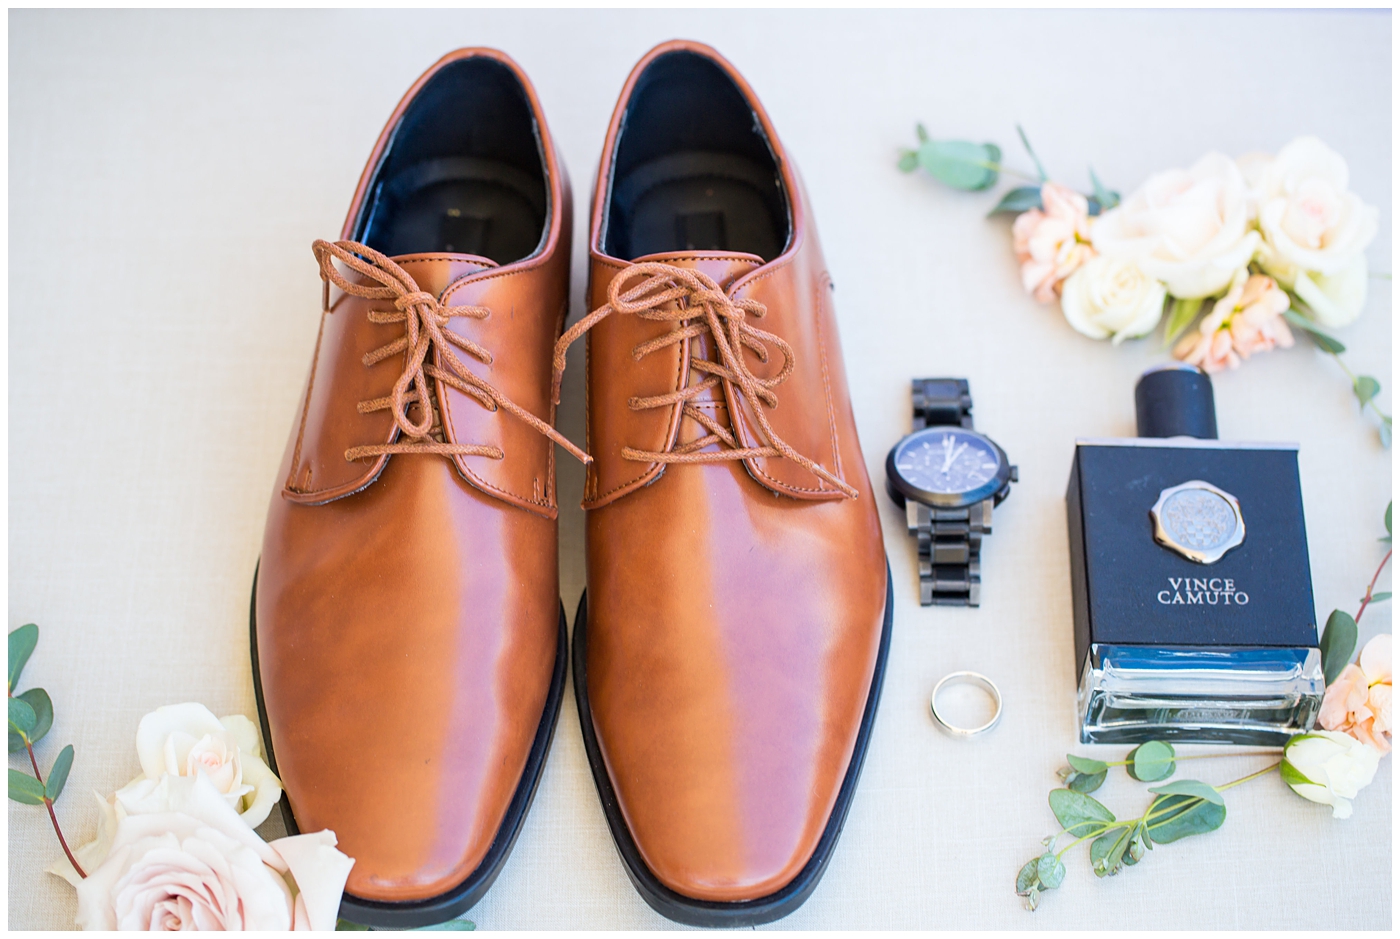 groom's light brown shoes with watch and cologne on wedding day details